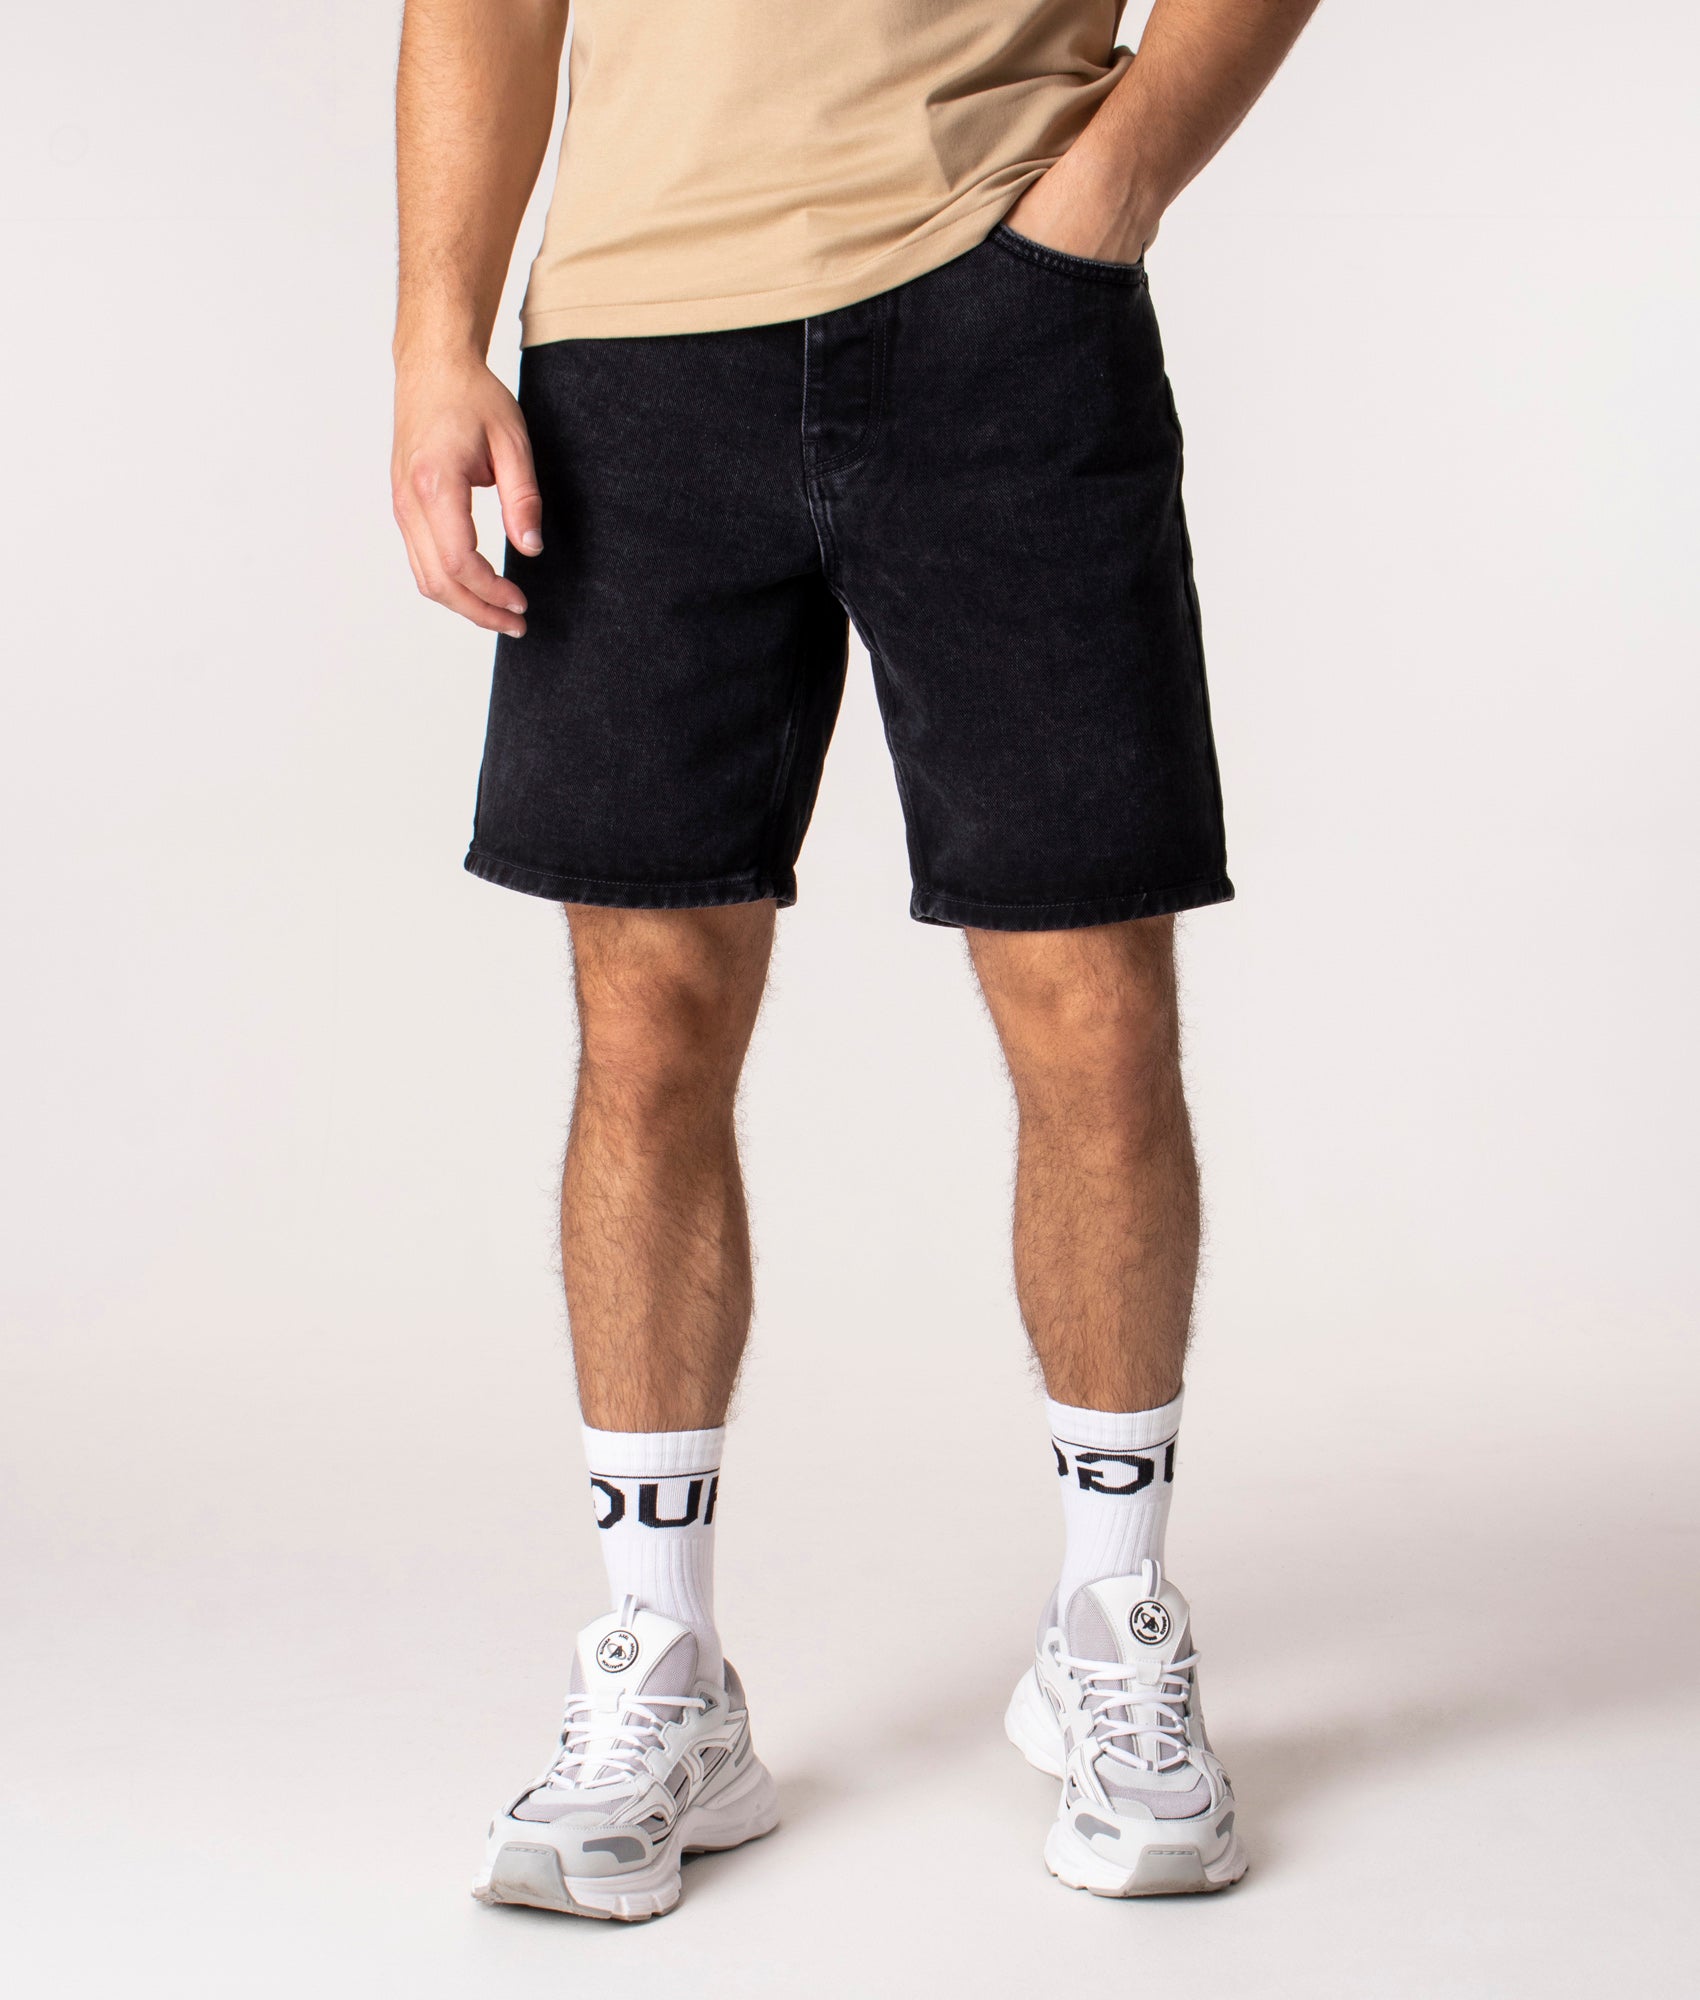 Carhartt WIP Mens Relaxed Fit Newell Denim Shorts - Colour: 890600 Black Denim Stone Washed - Size: 